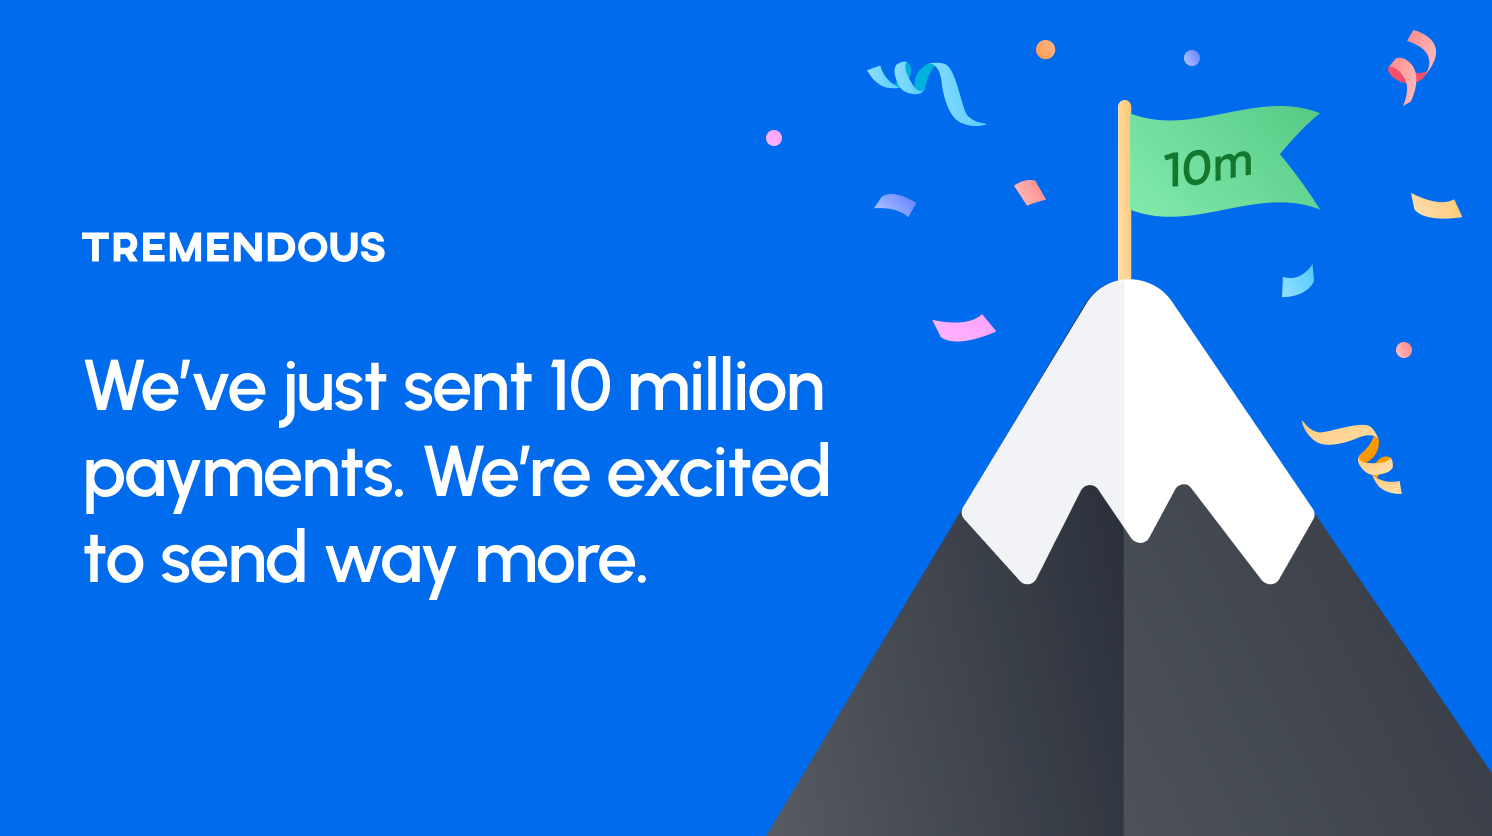 Text reads: "We've just sent 10 million payments. We're excited to send way more." On the right is an image of a mountain with a flag planted on top that says "10m".